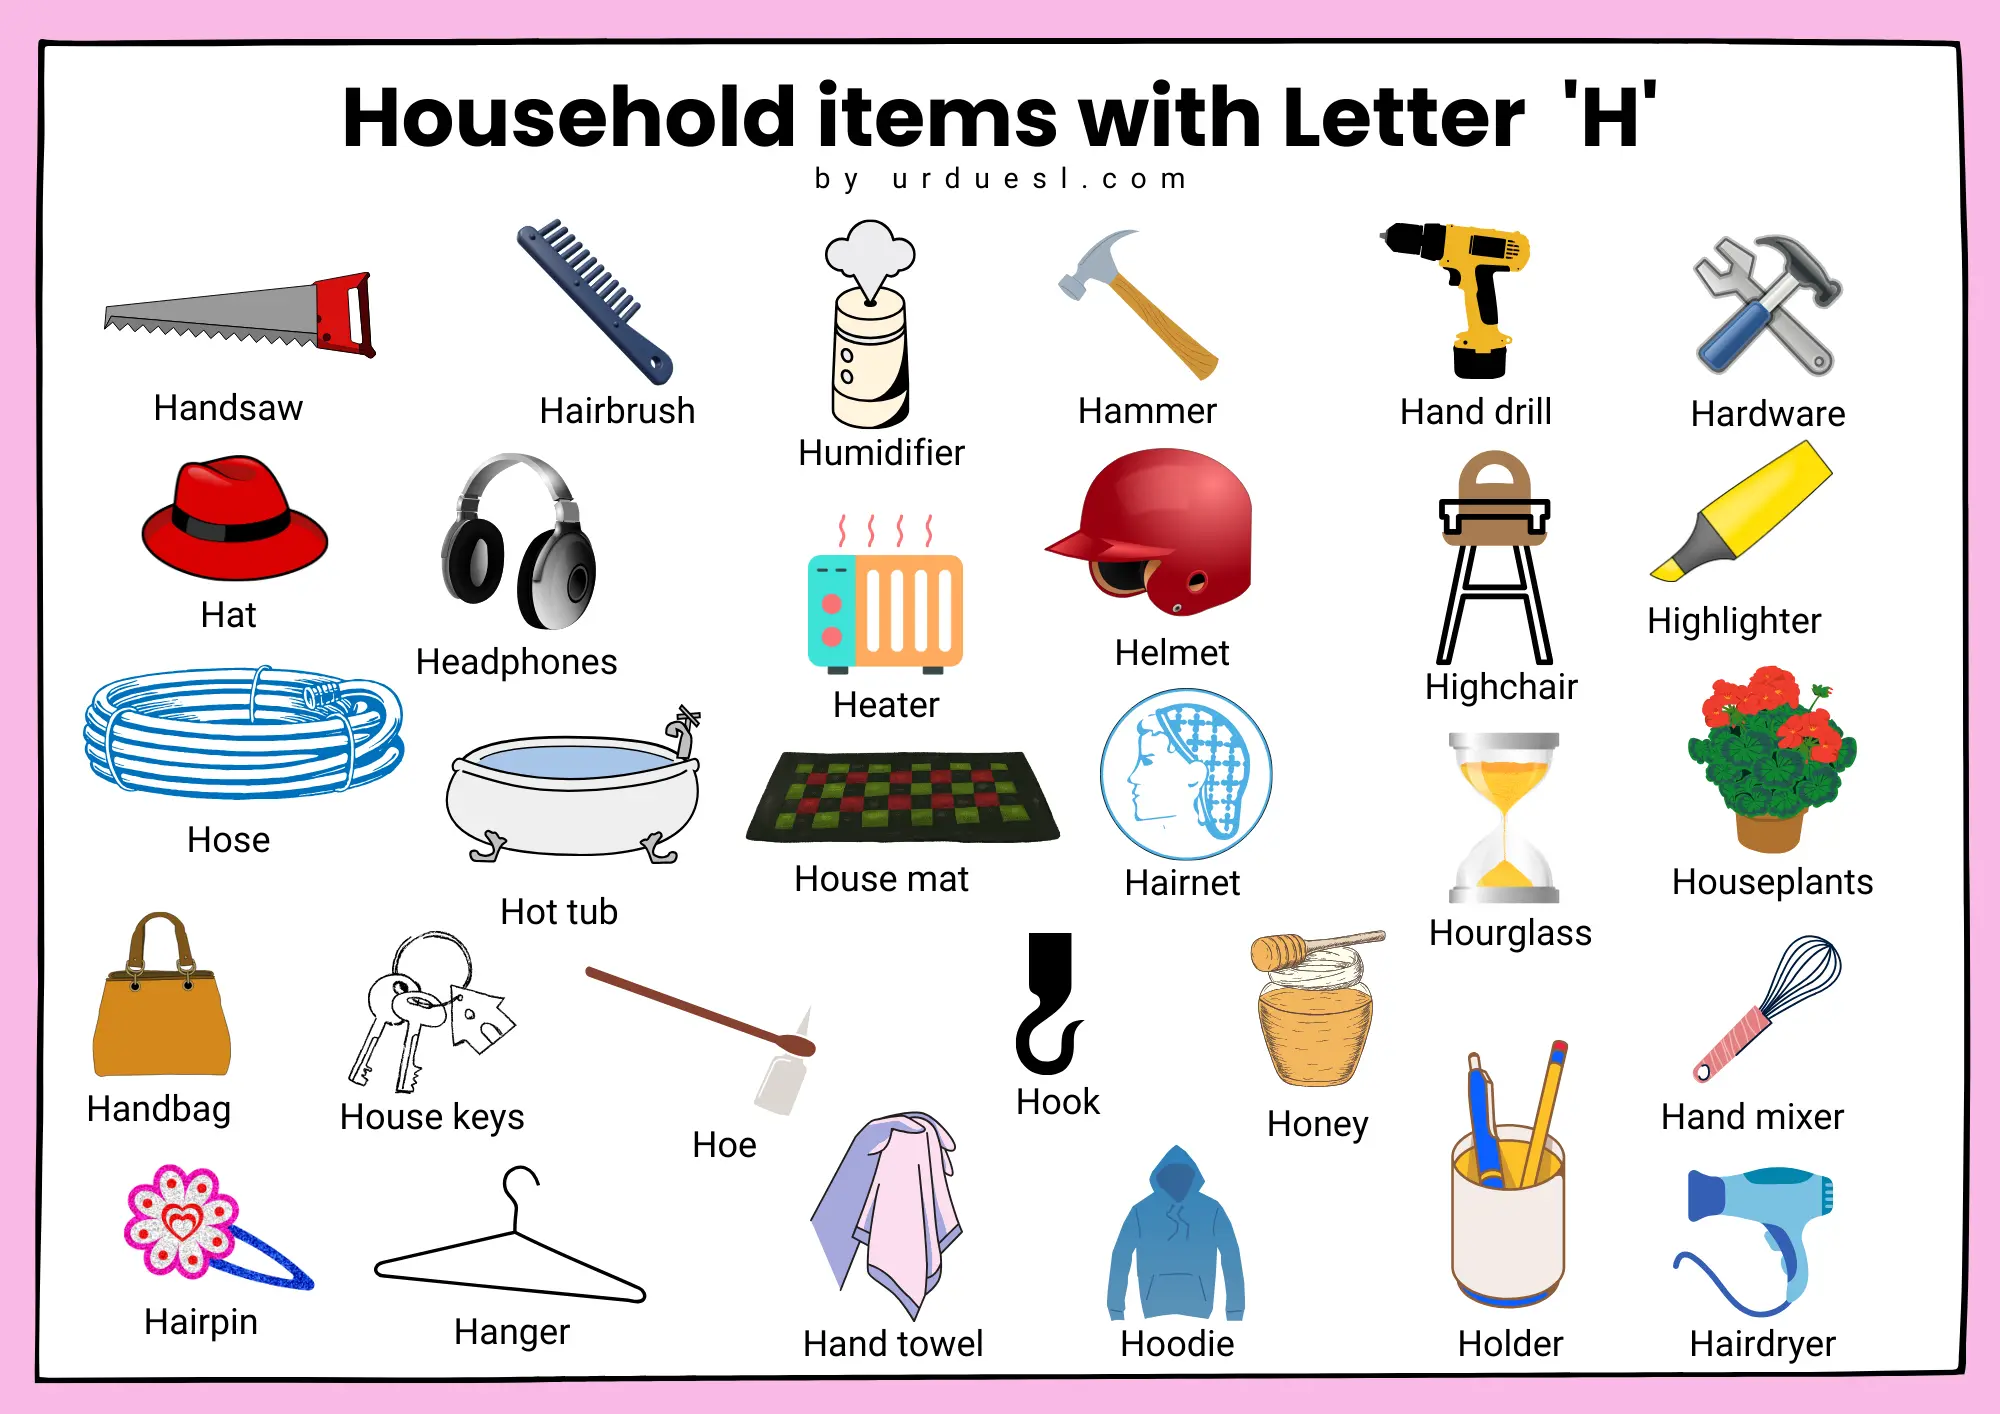 A collage of various household items starting with the letter "H." The items include a hat, hammer, hanger, helmet, and a headphone, among others.